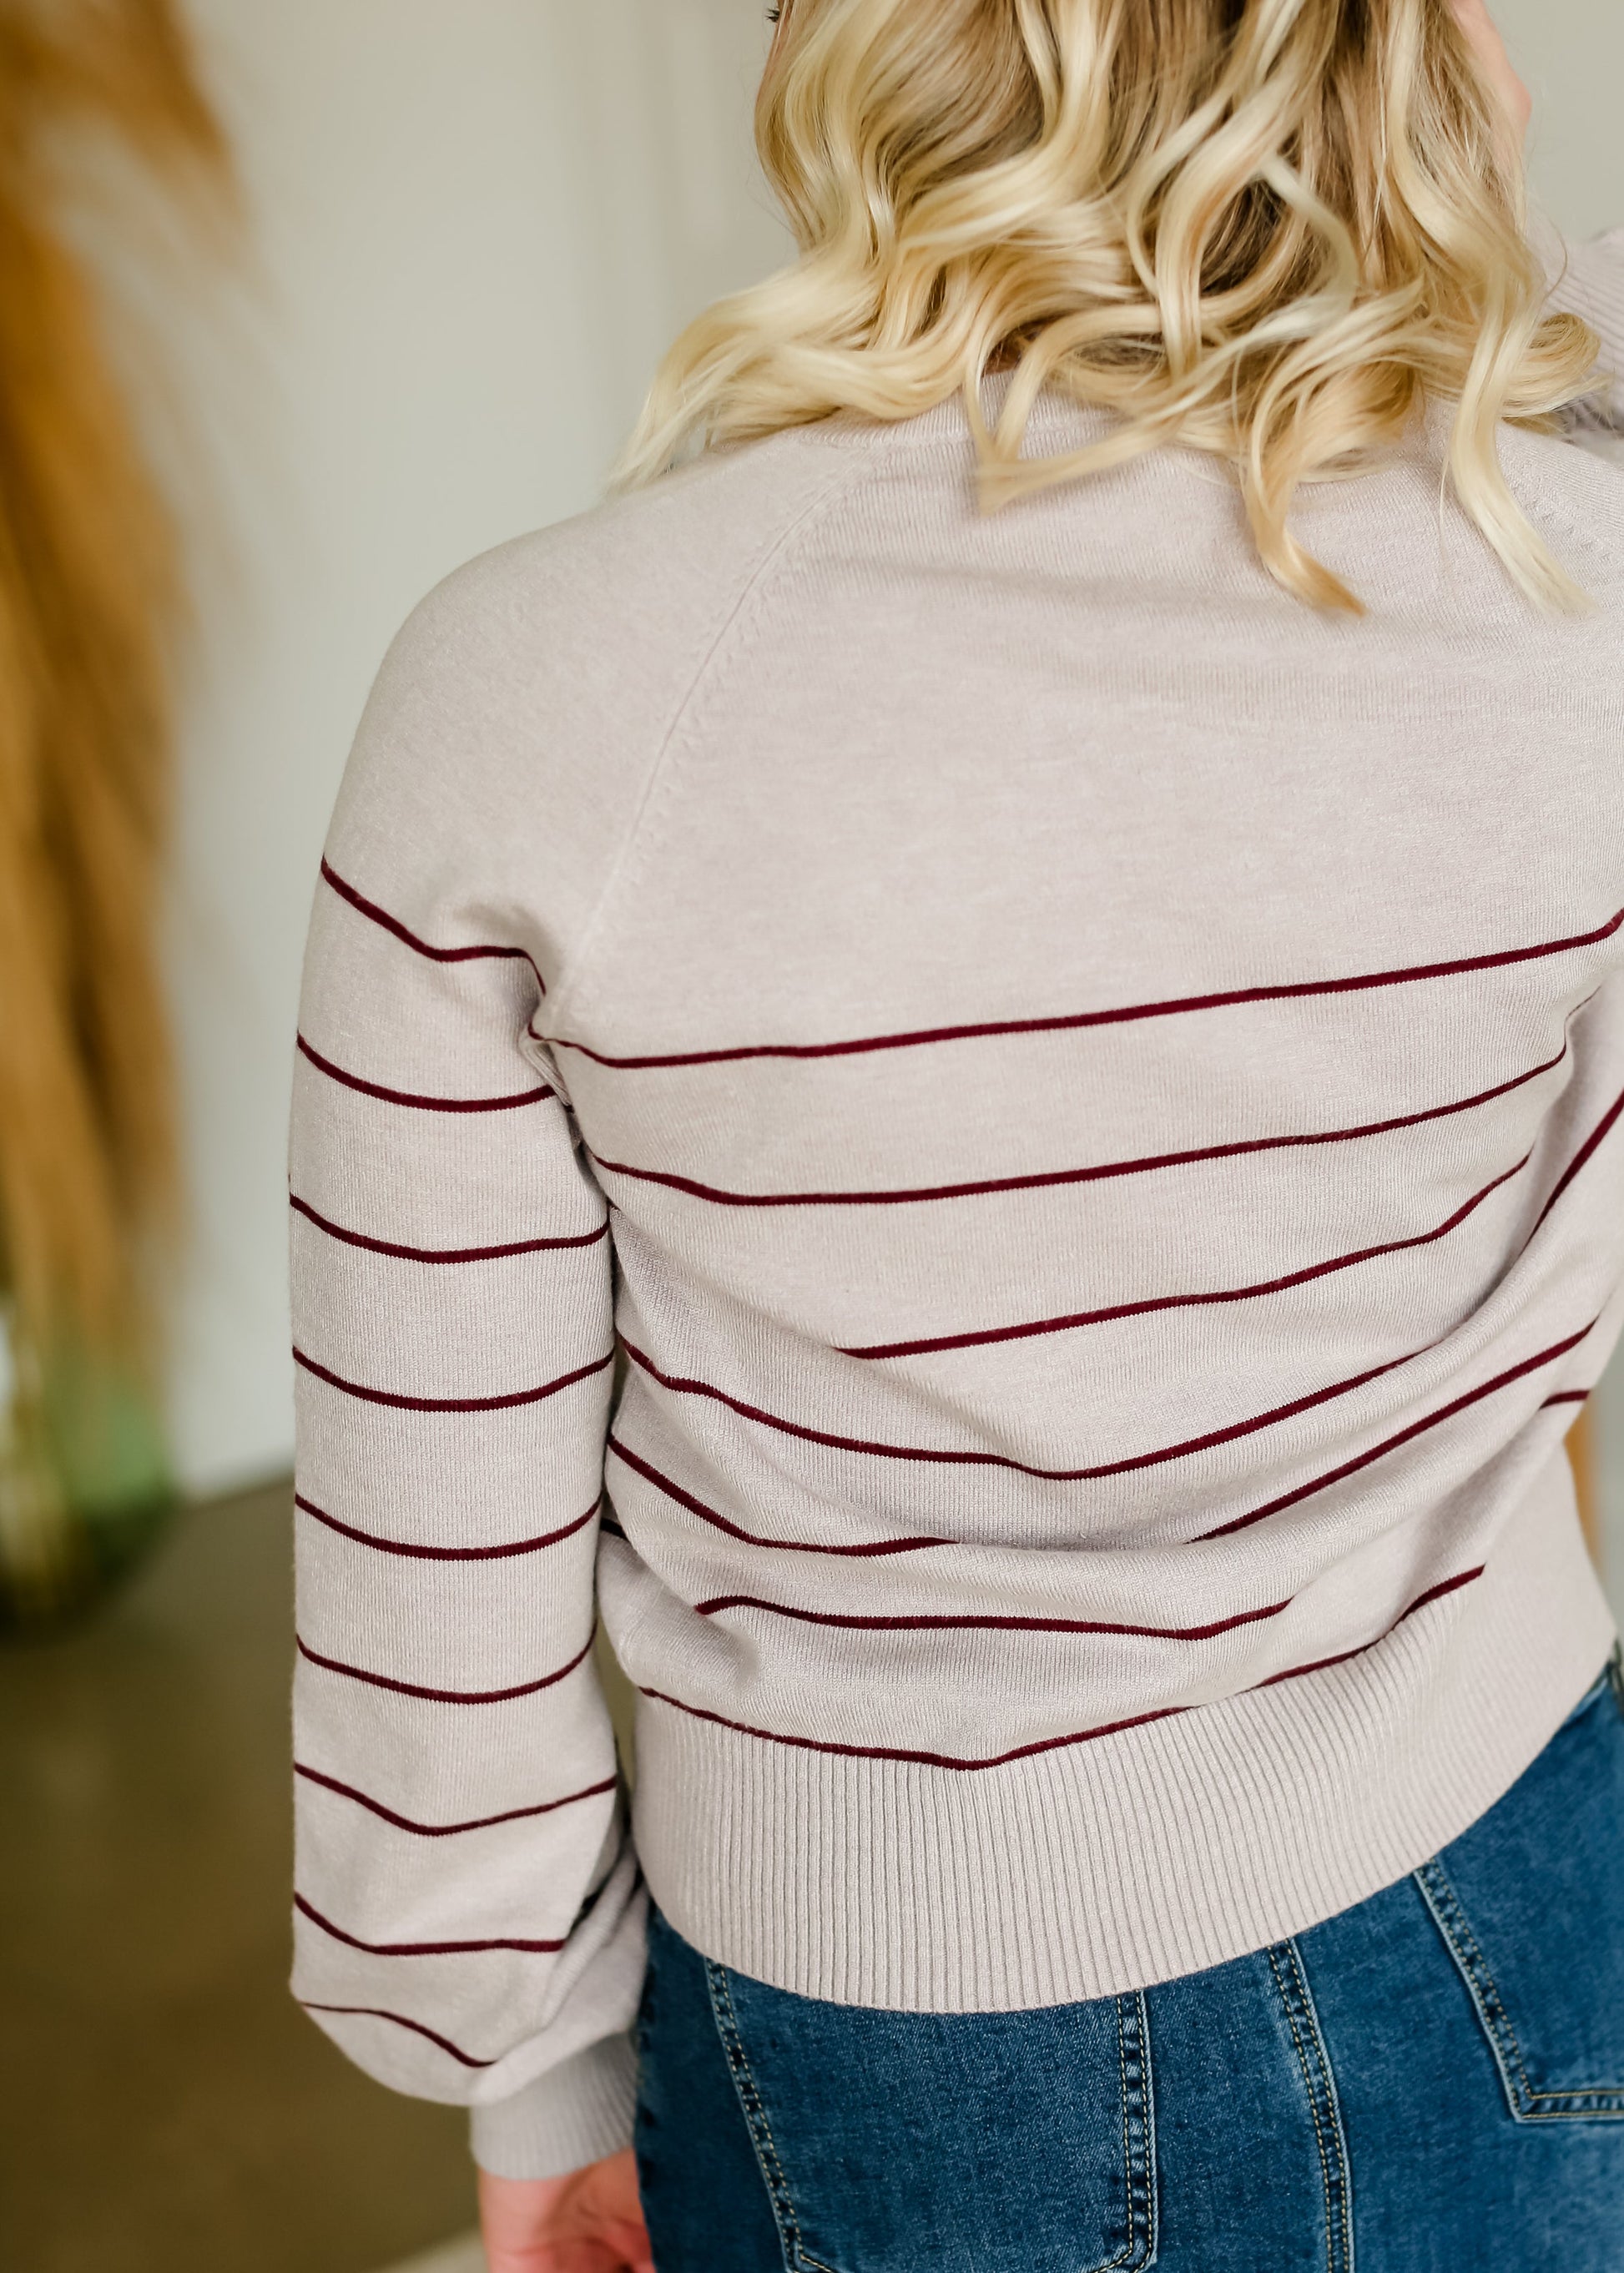 Mulberry Striped Button Detail Sweater - FINAL SALE Tops